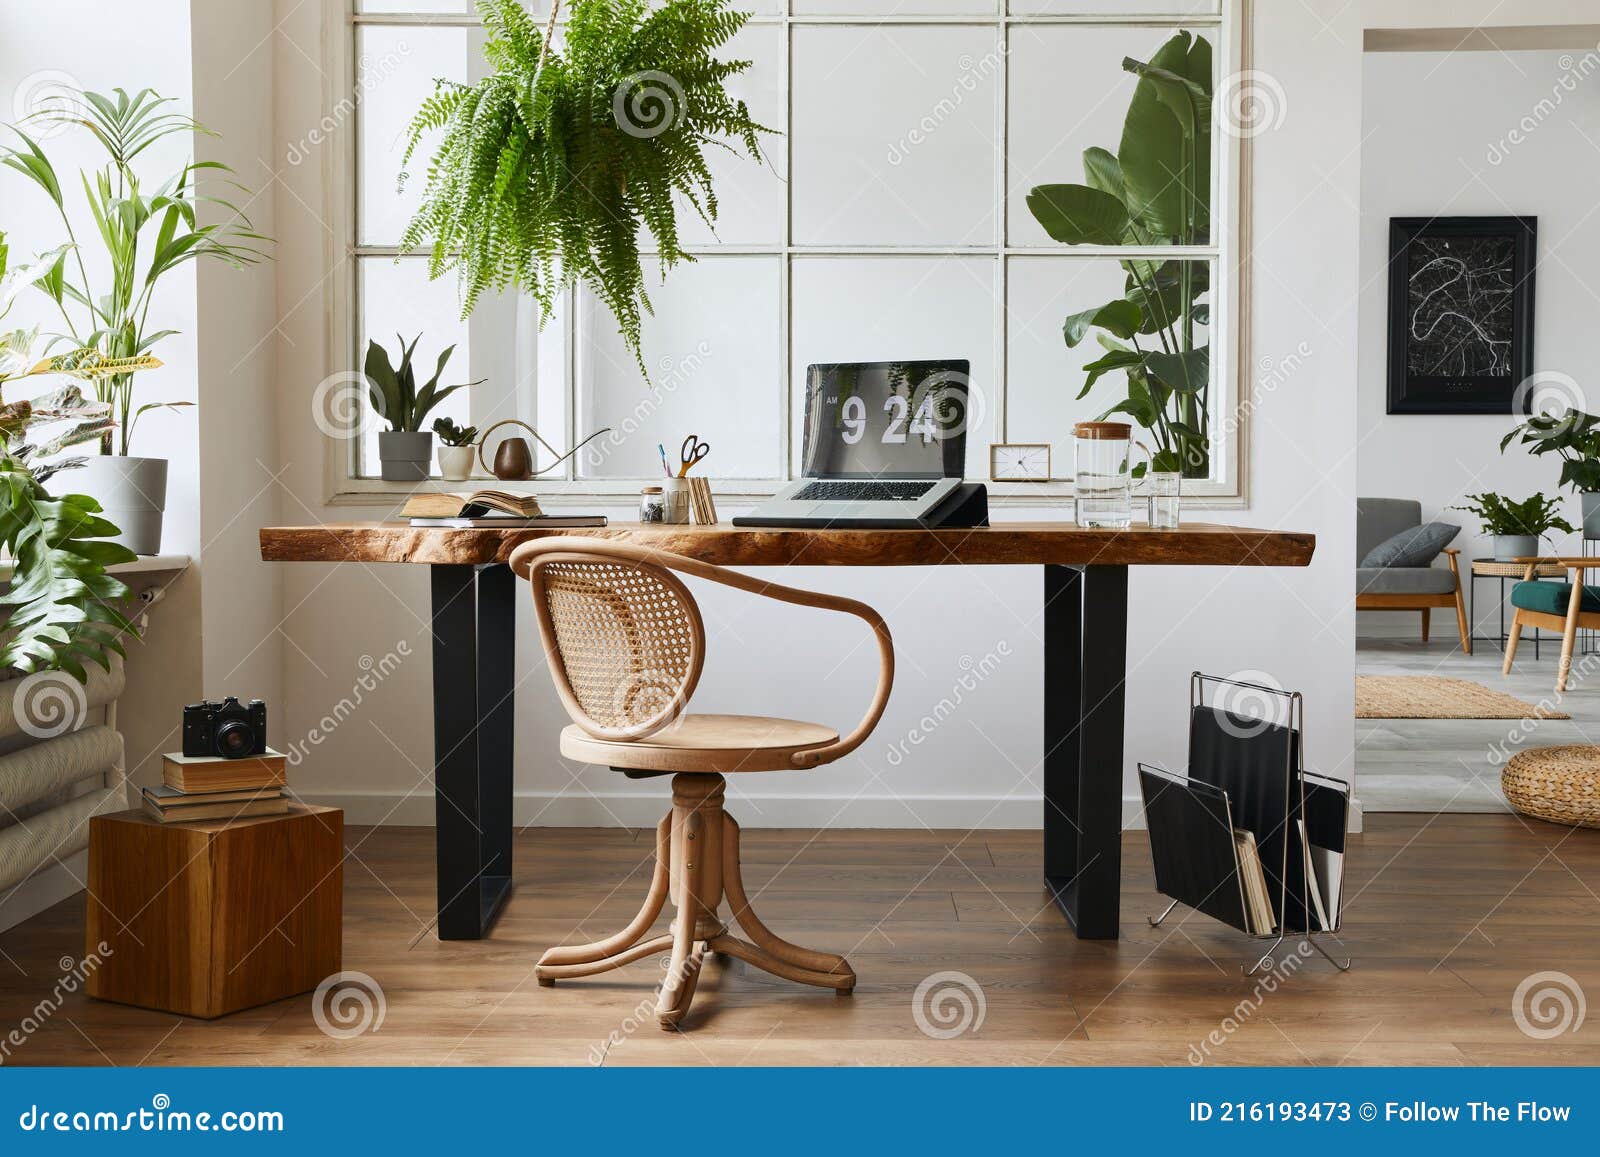 Interior Design Of Home Office Space With Stylish Wooden Desk, Beautiful  Chair, Laptop, Plants, Book. Stock Image - Image Of Decor, Living: 216193473